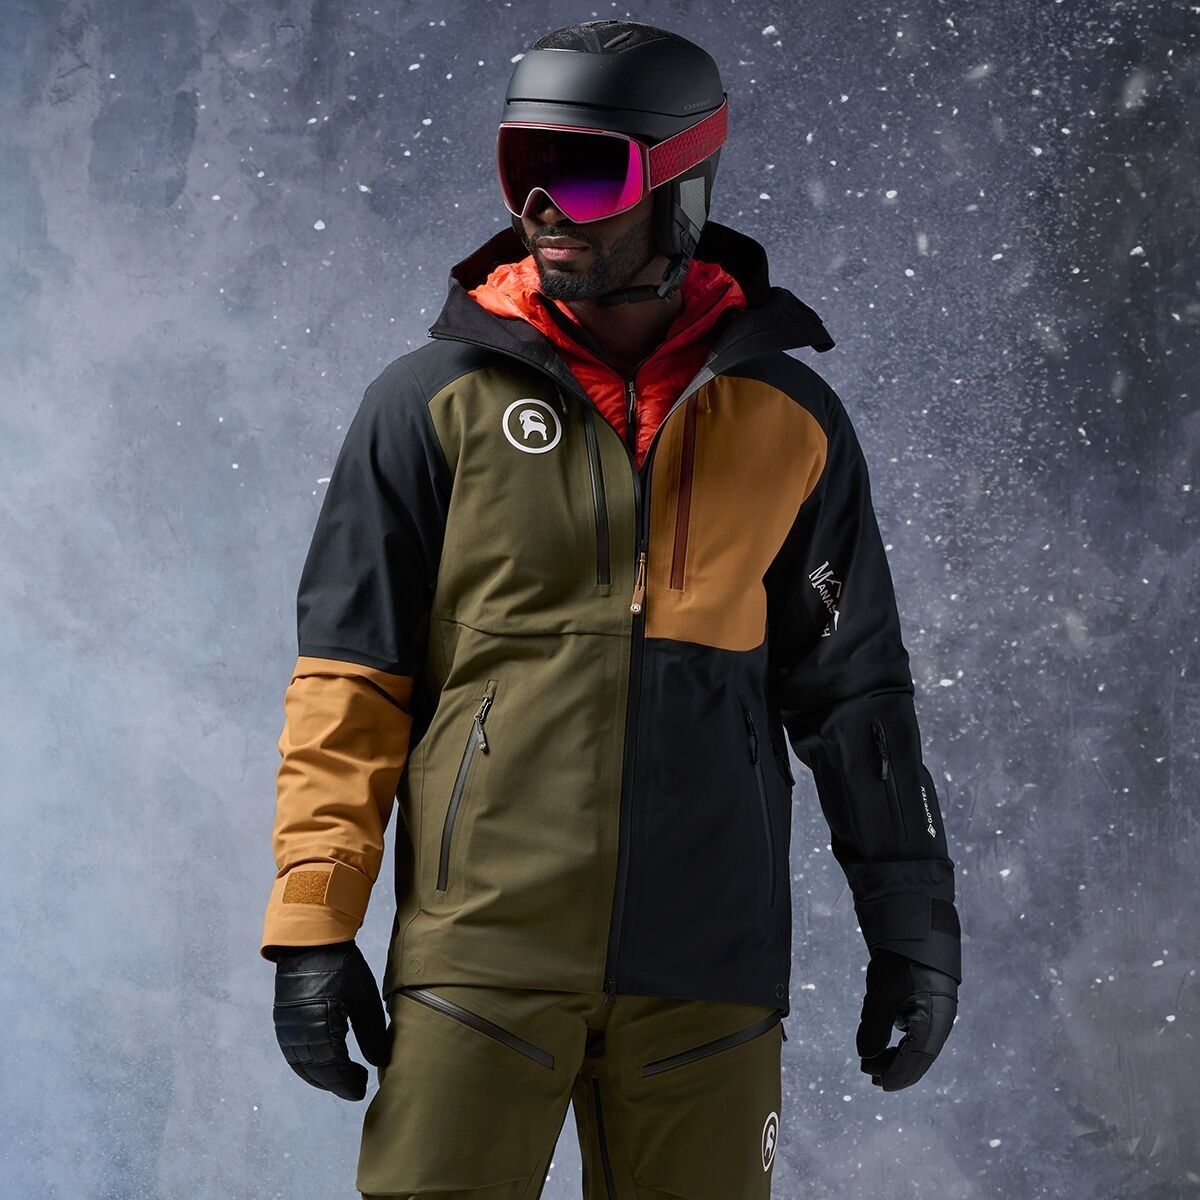 Snowboarding Gear and Clothing Backcountry